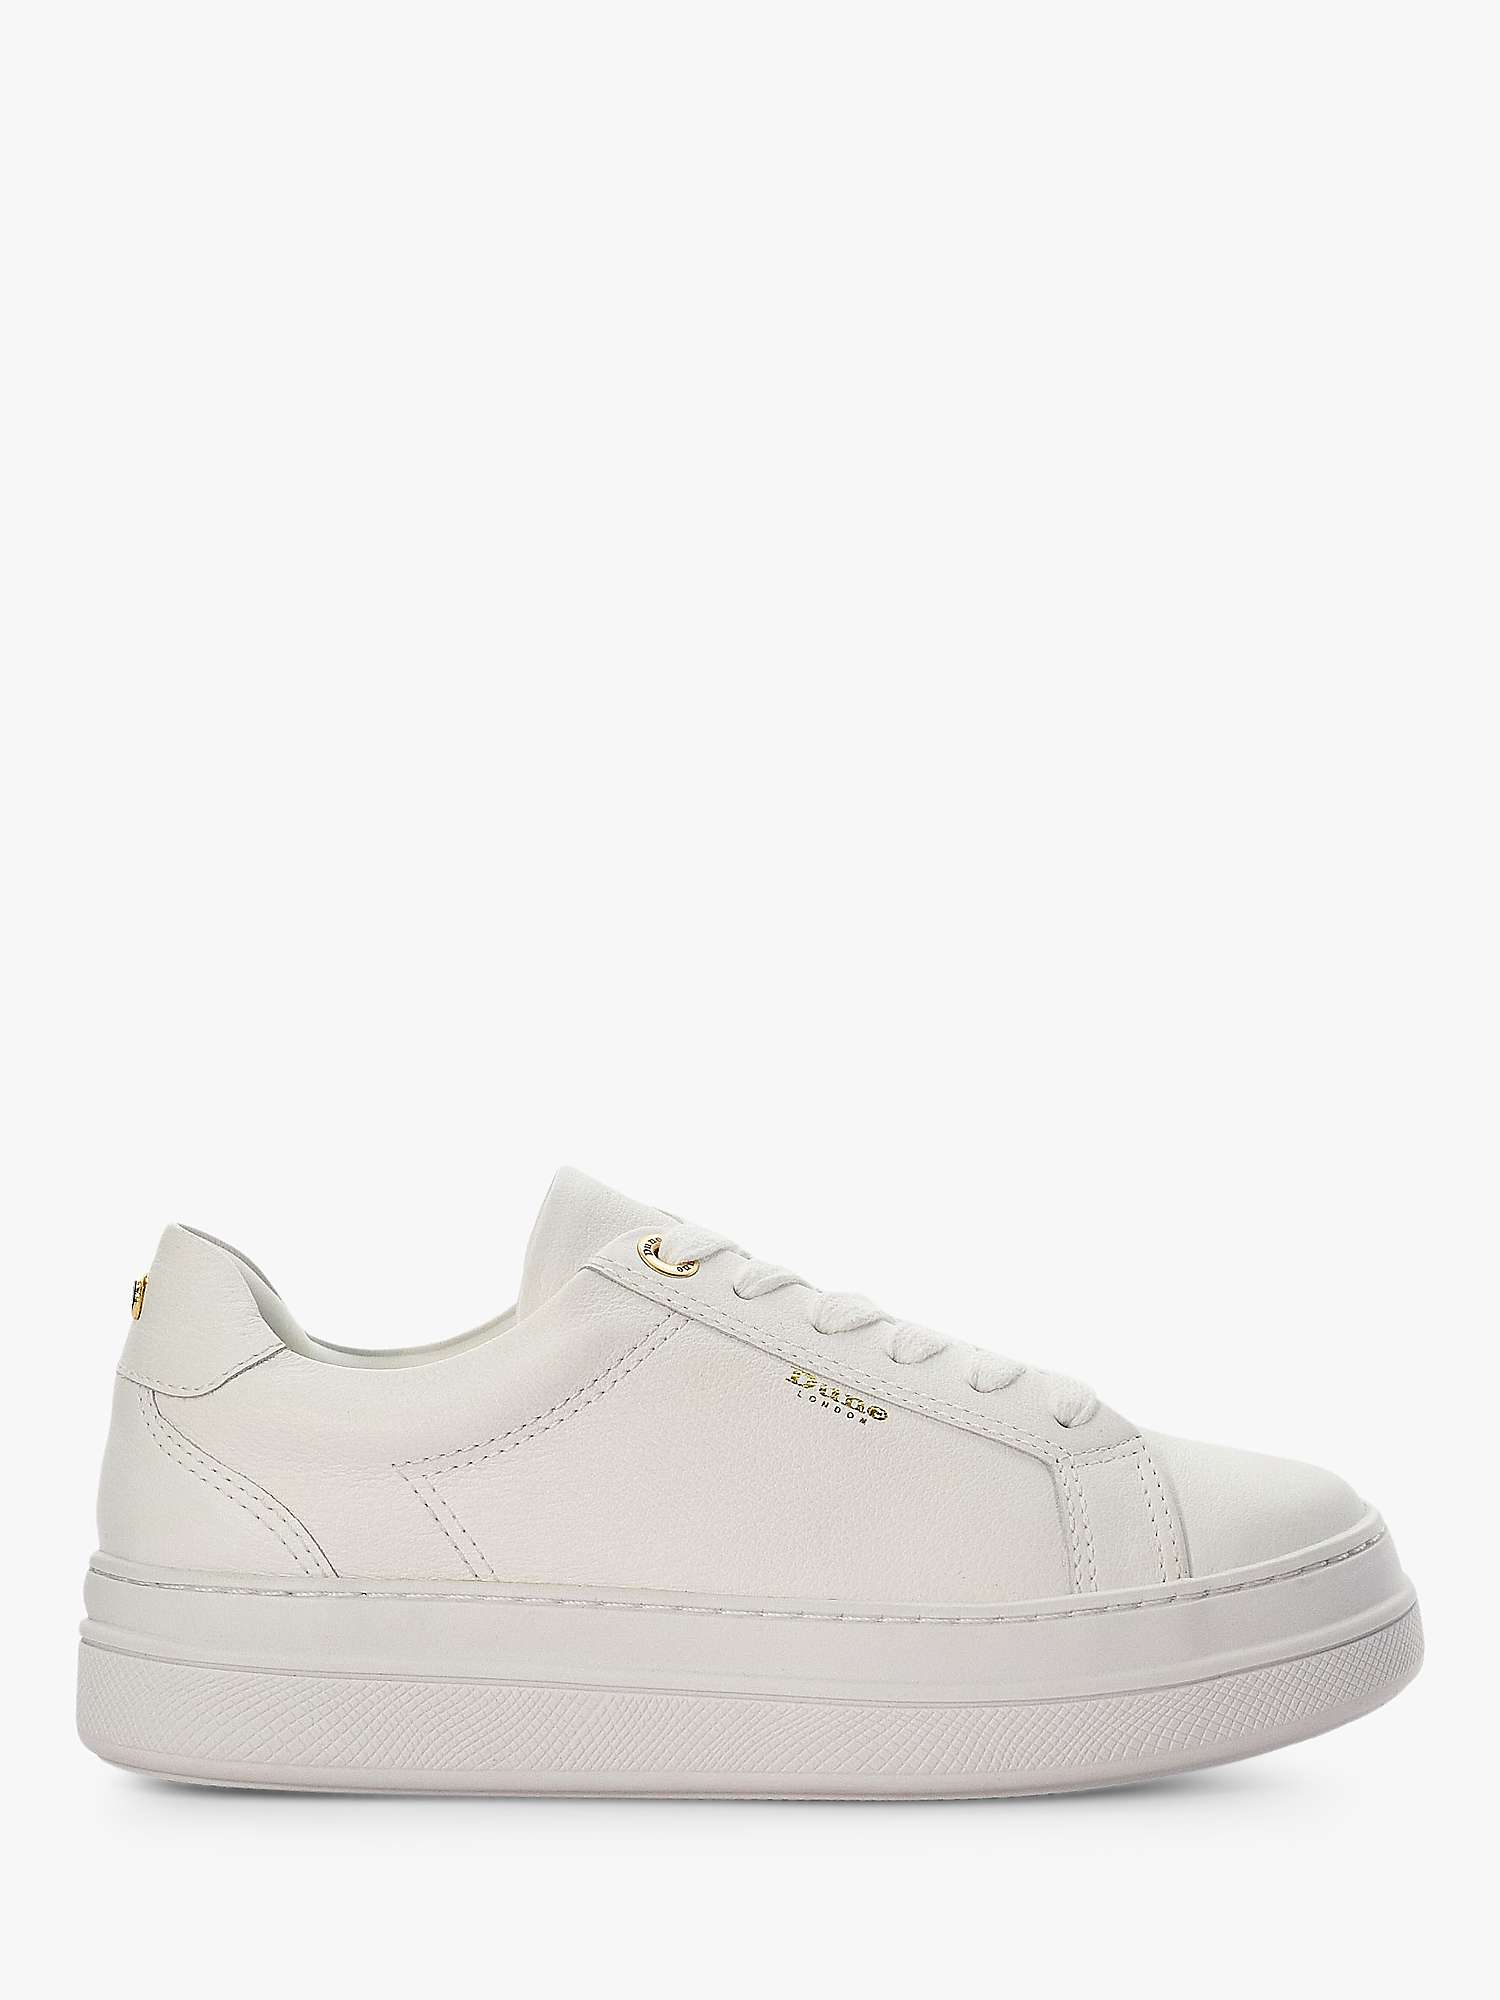 Buy Dune Eastern Leather Platform Trainers, White Online at johnlewis.com